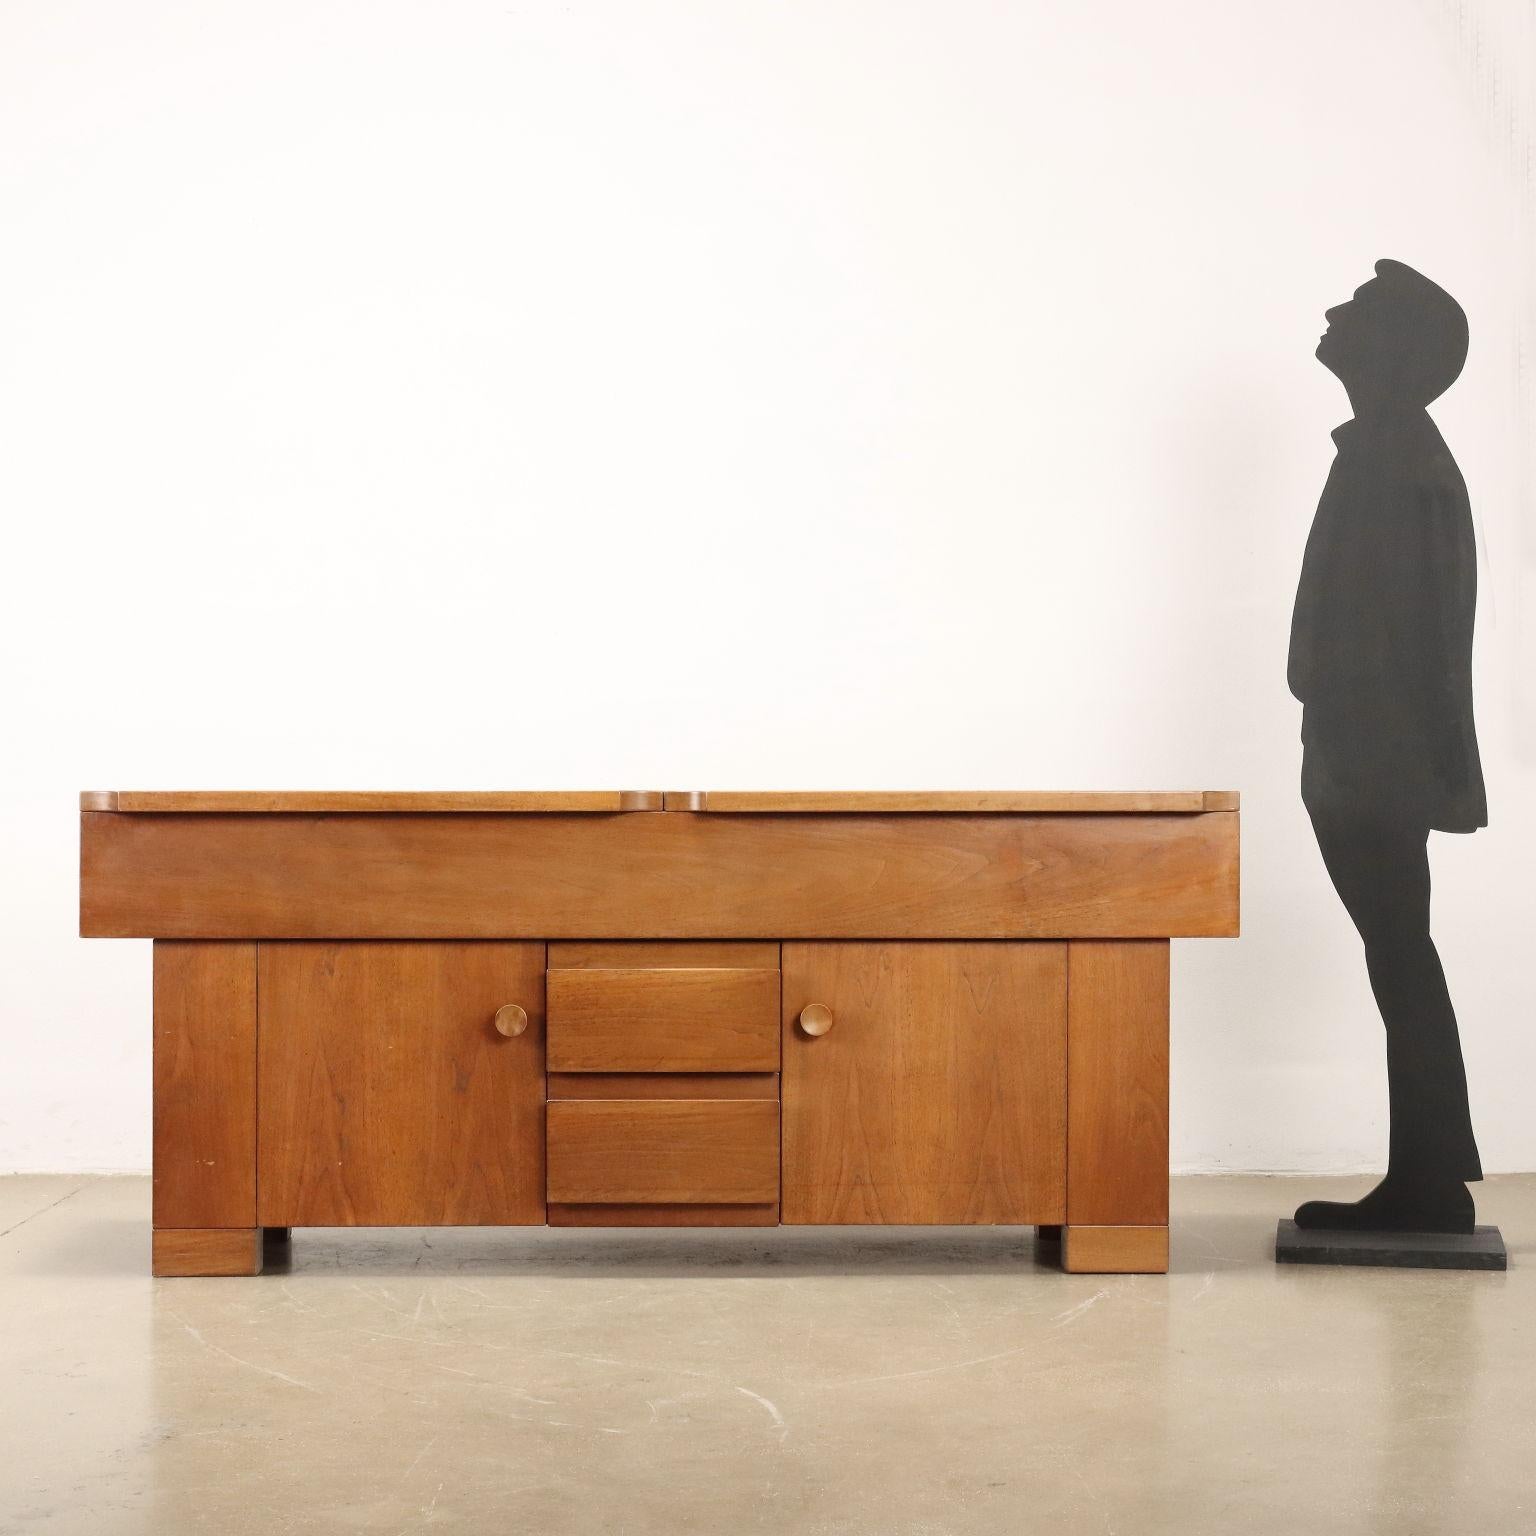 Sideboard cabinet with hinged doors and exposed drawers, designed by Michelucci in 1964; walnut veneer wood. Good conditions.